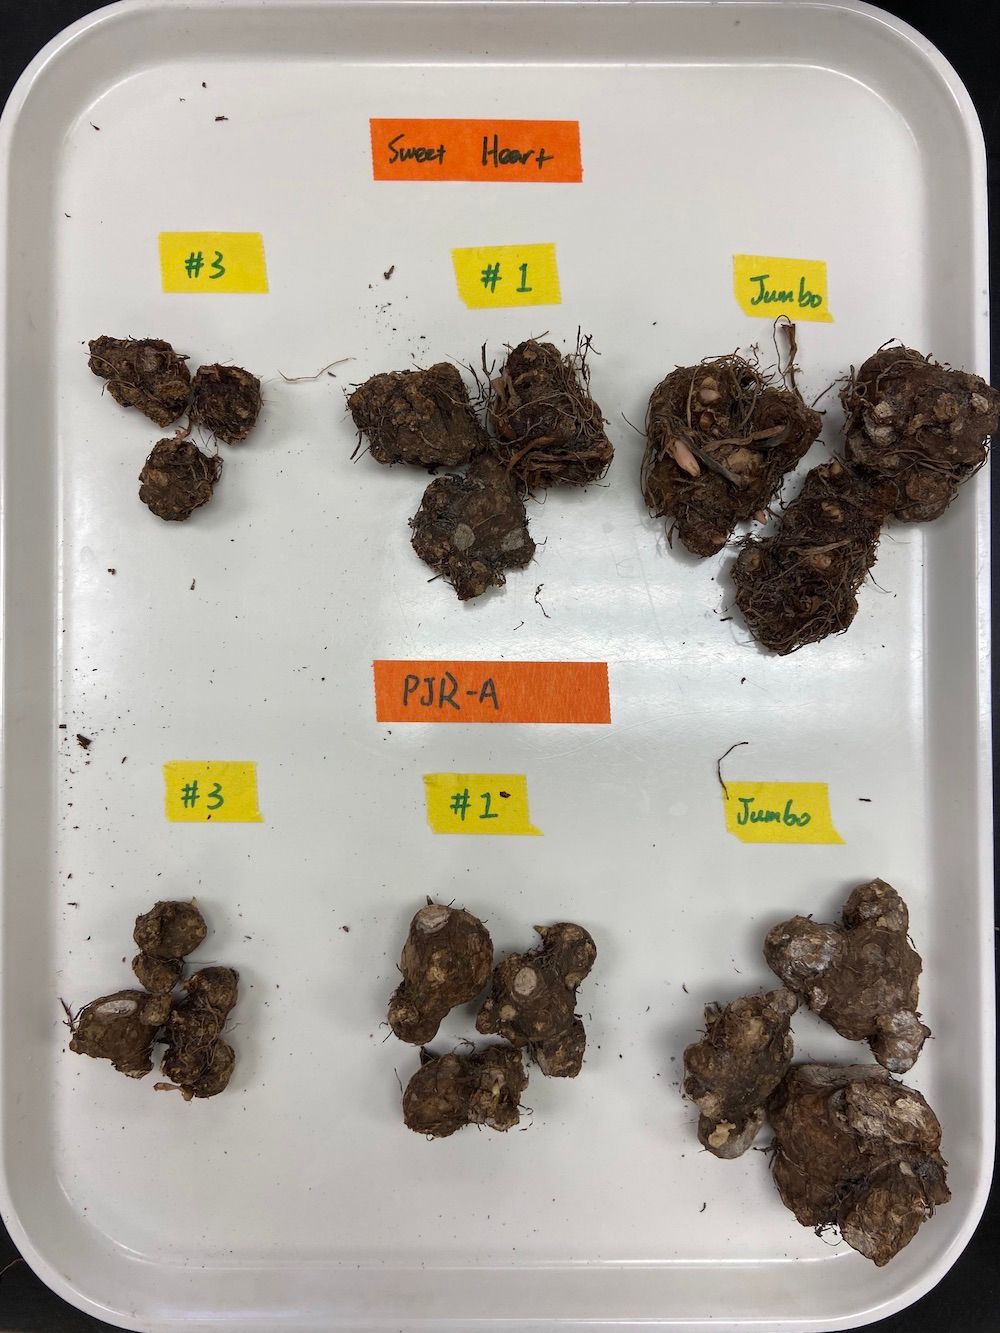 Caladium tubers (two cultivars Sweet Heart and Postman Joyner, each with three different tuber sizes “#3”, “#1”, and “Jumbo”) infested with root-knot nematodes, UF/GCREC, July 2020. 